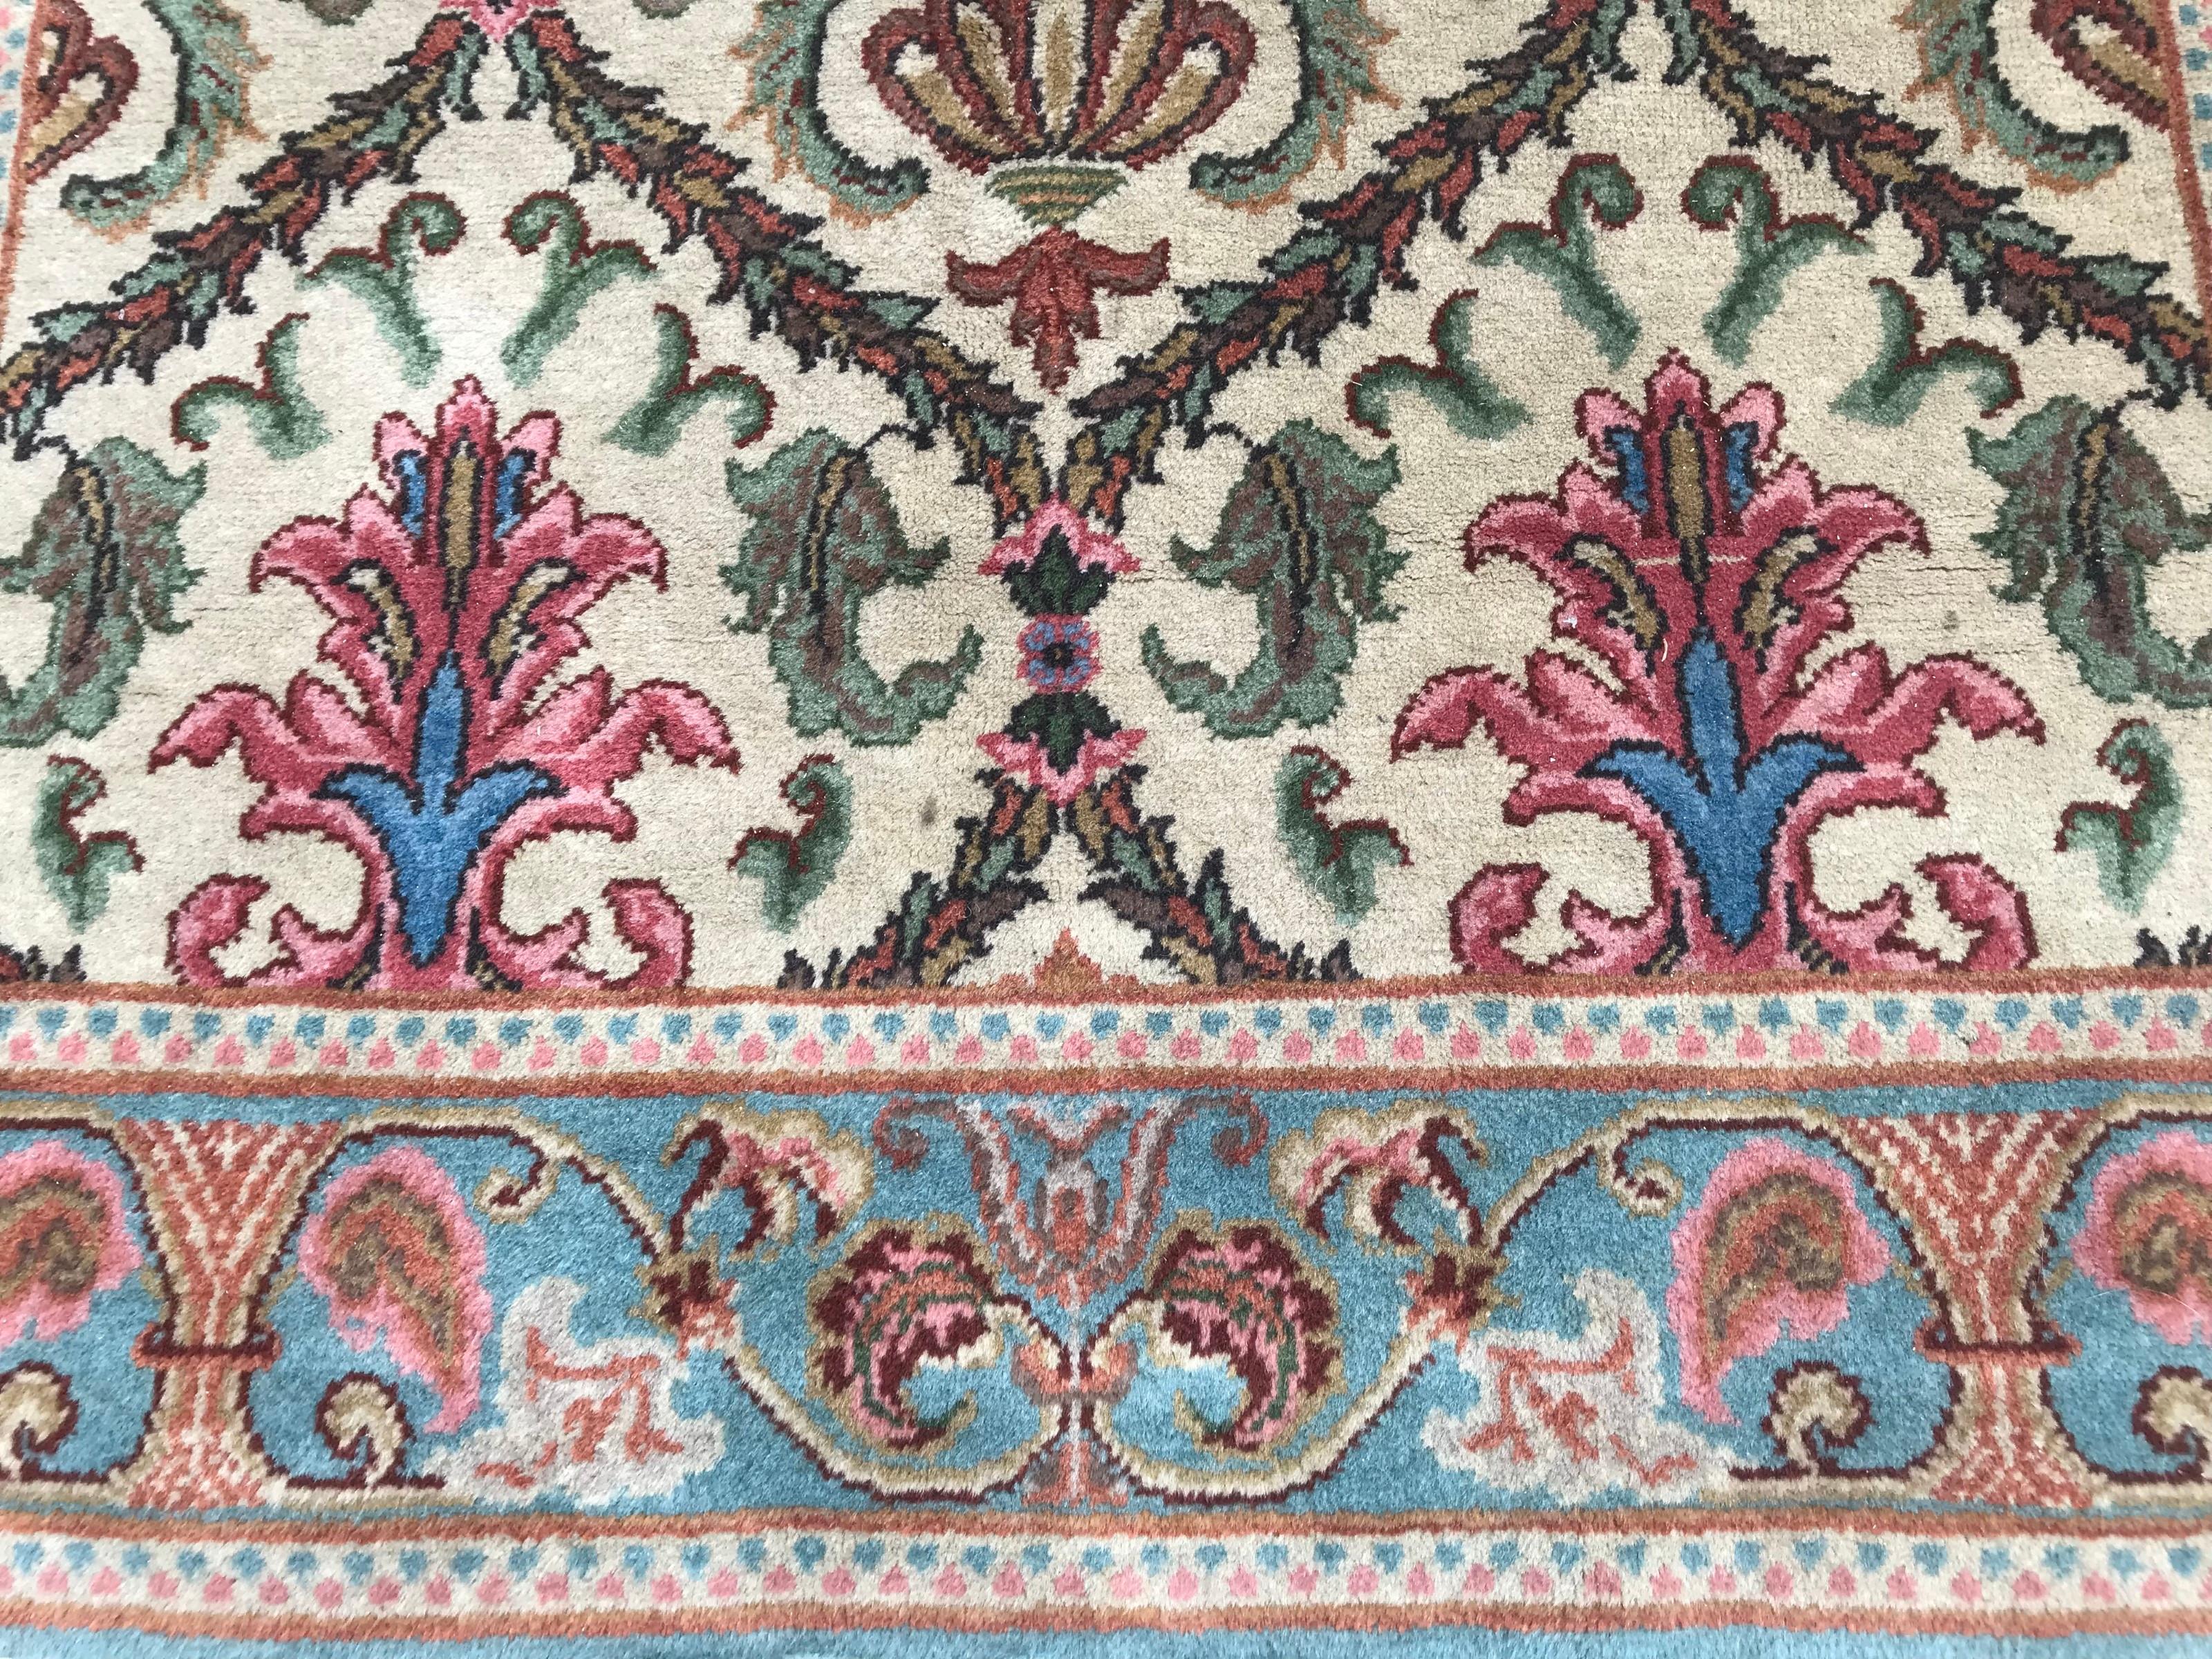 Discover the charm of our exquisite mid-20th century Transylvanian rug featuring a stunning 17th century European Victorian design. Hand-knotted with care, its vibrant colors of green, blue, and pink add a touch of elegance. Crafted with wool velvet